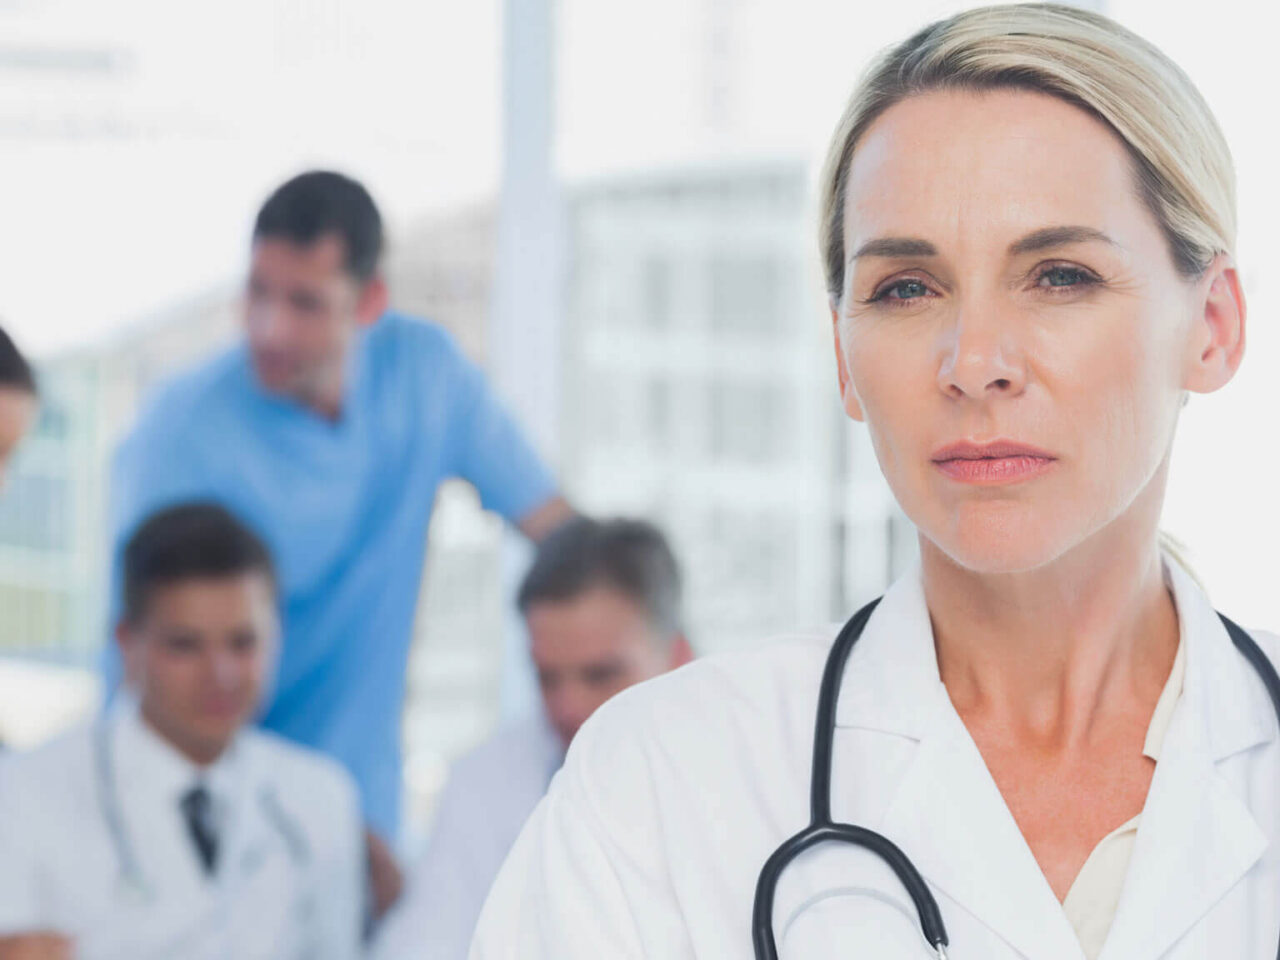 Female doctor in a white coat standing in front of a group of doctors